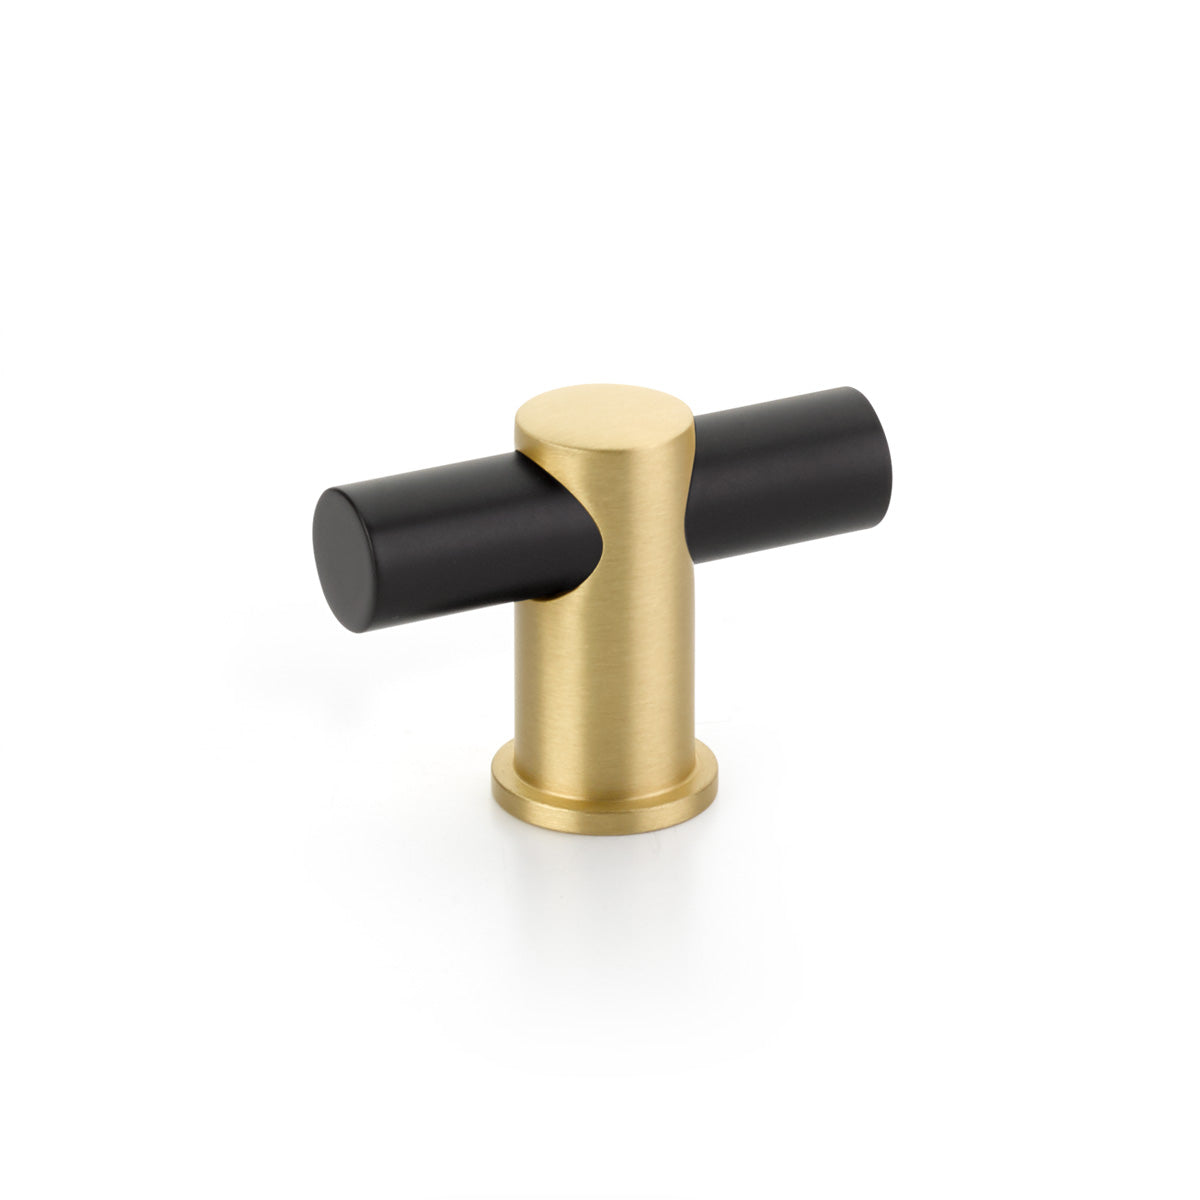 Satin Brass and Matte Black Round T-Bar "Fonce" Cabinet Knobs and Drawer Pulls - Brass Cabinet Hardware 